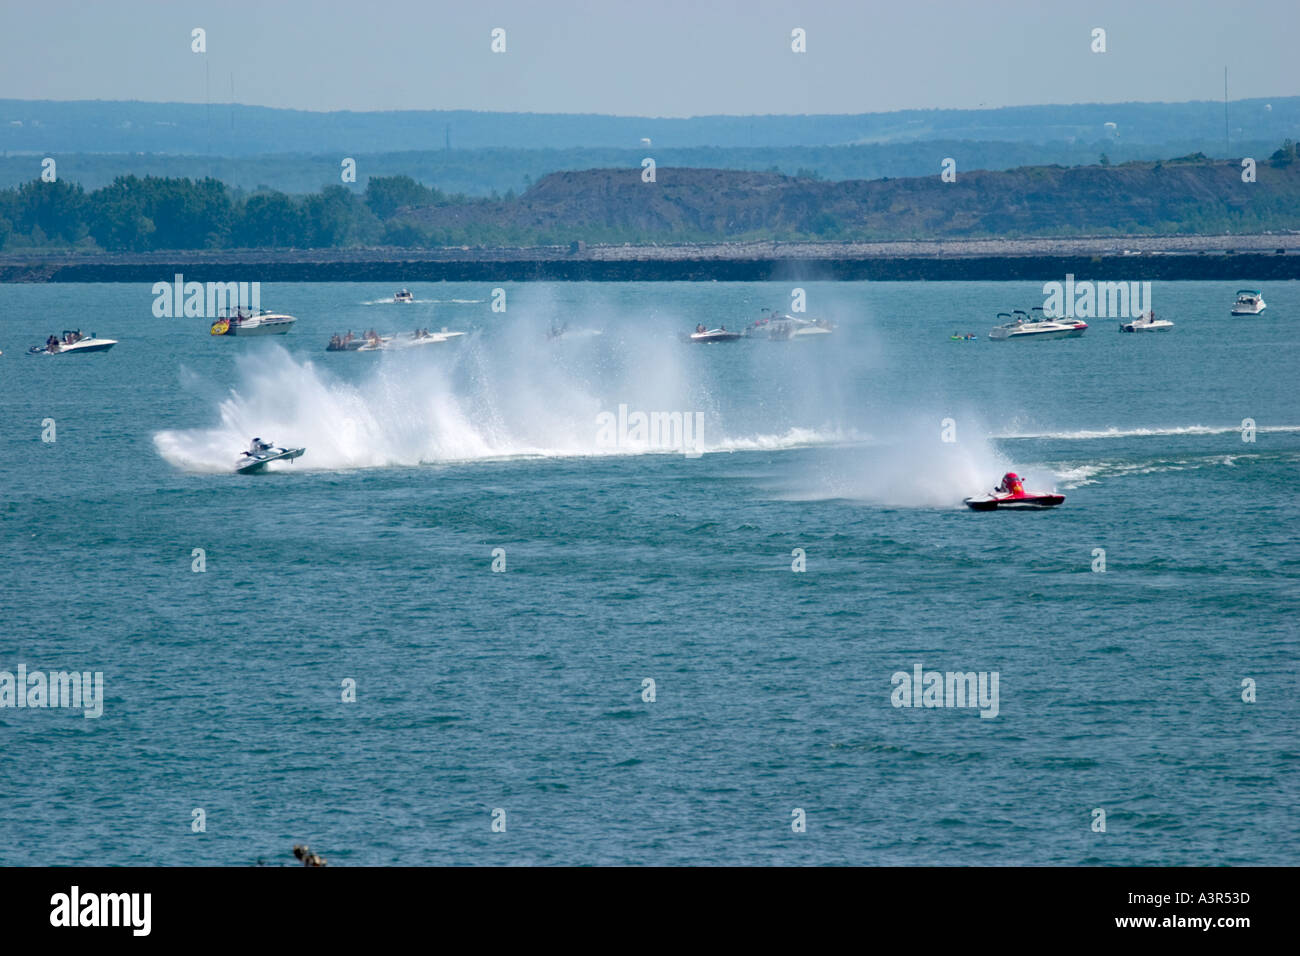 Hydroplane race in the harbor of buffalo New York Stock Photo